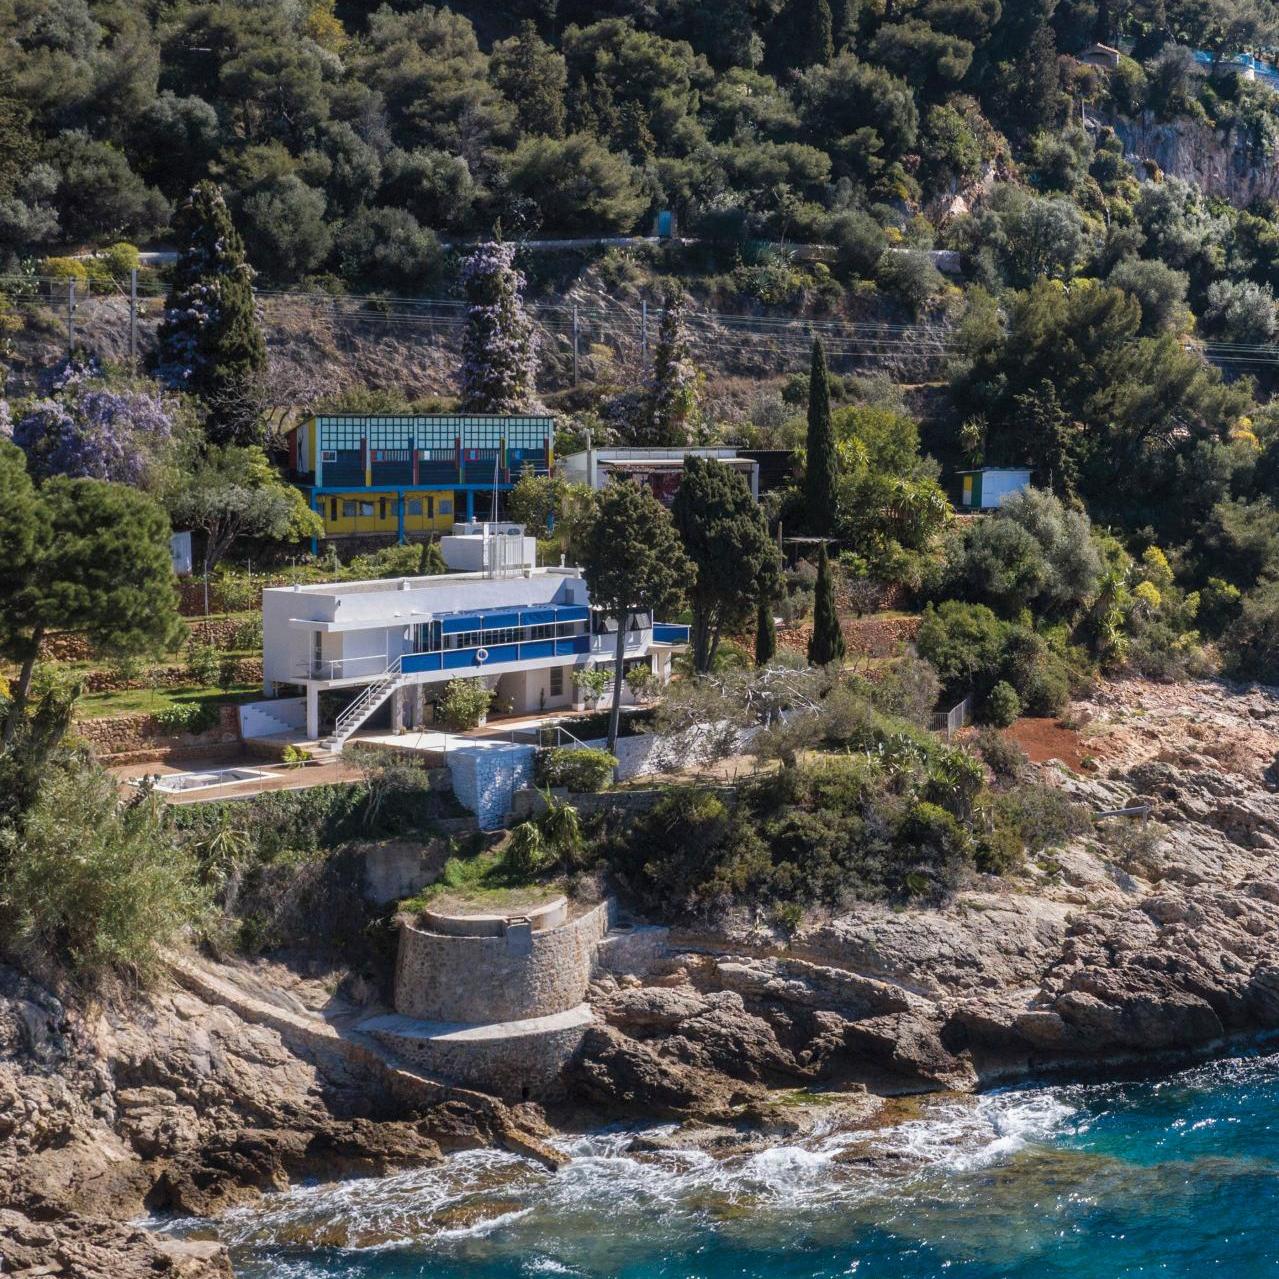 Villa E 1027: Eileen Gray's Masterpiece Rises from the Ashes - Cultural Heritage